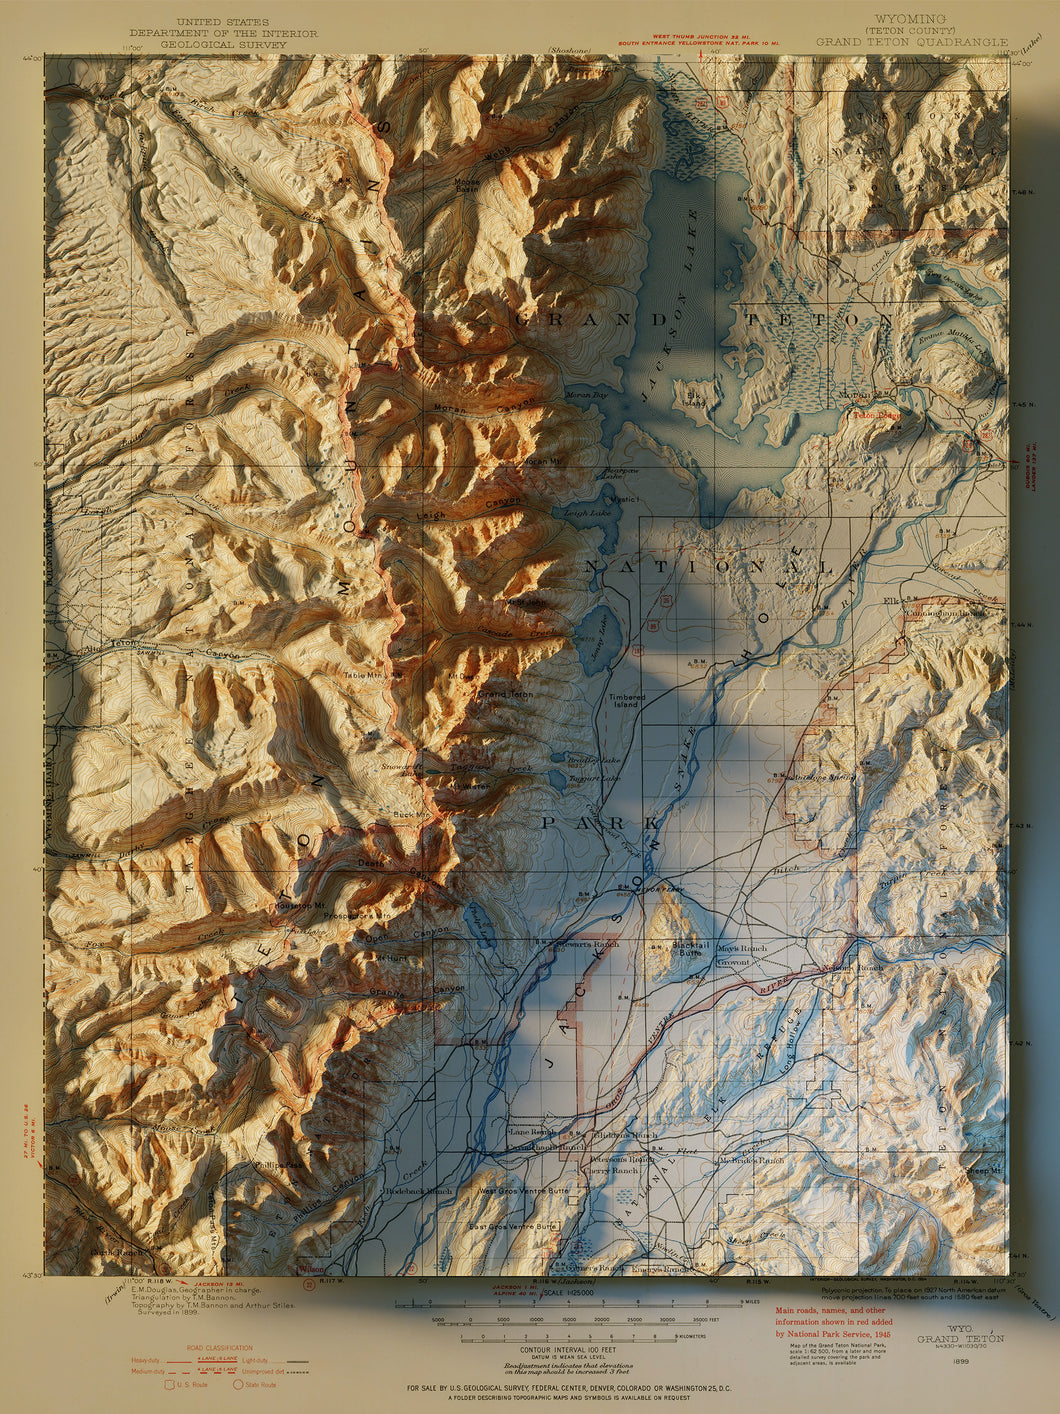 Grand Teton National Park Map Poster - Shaded Relief Topographical Map